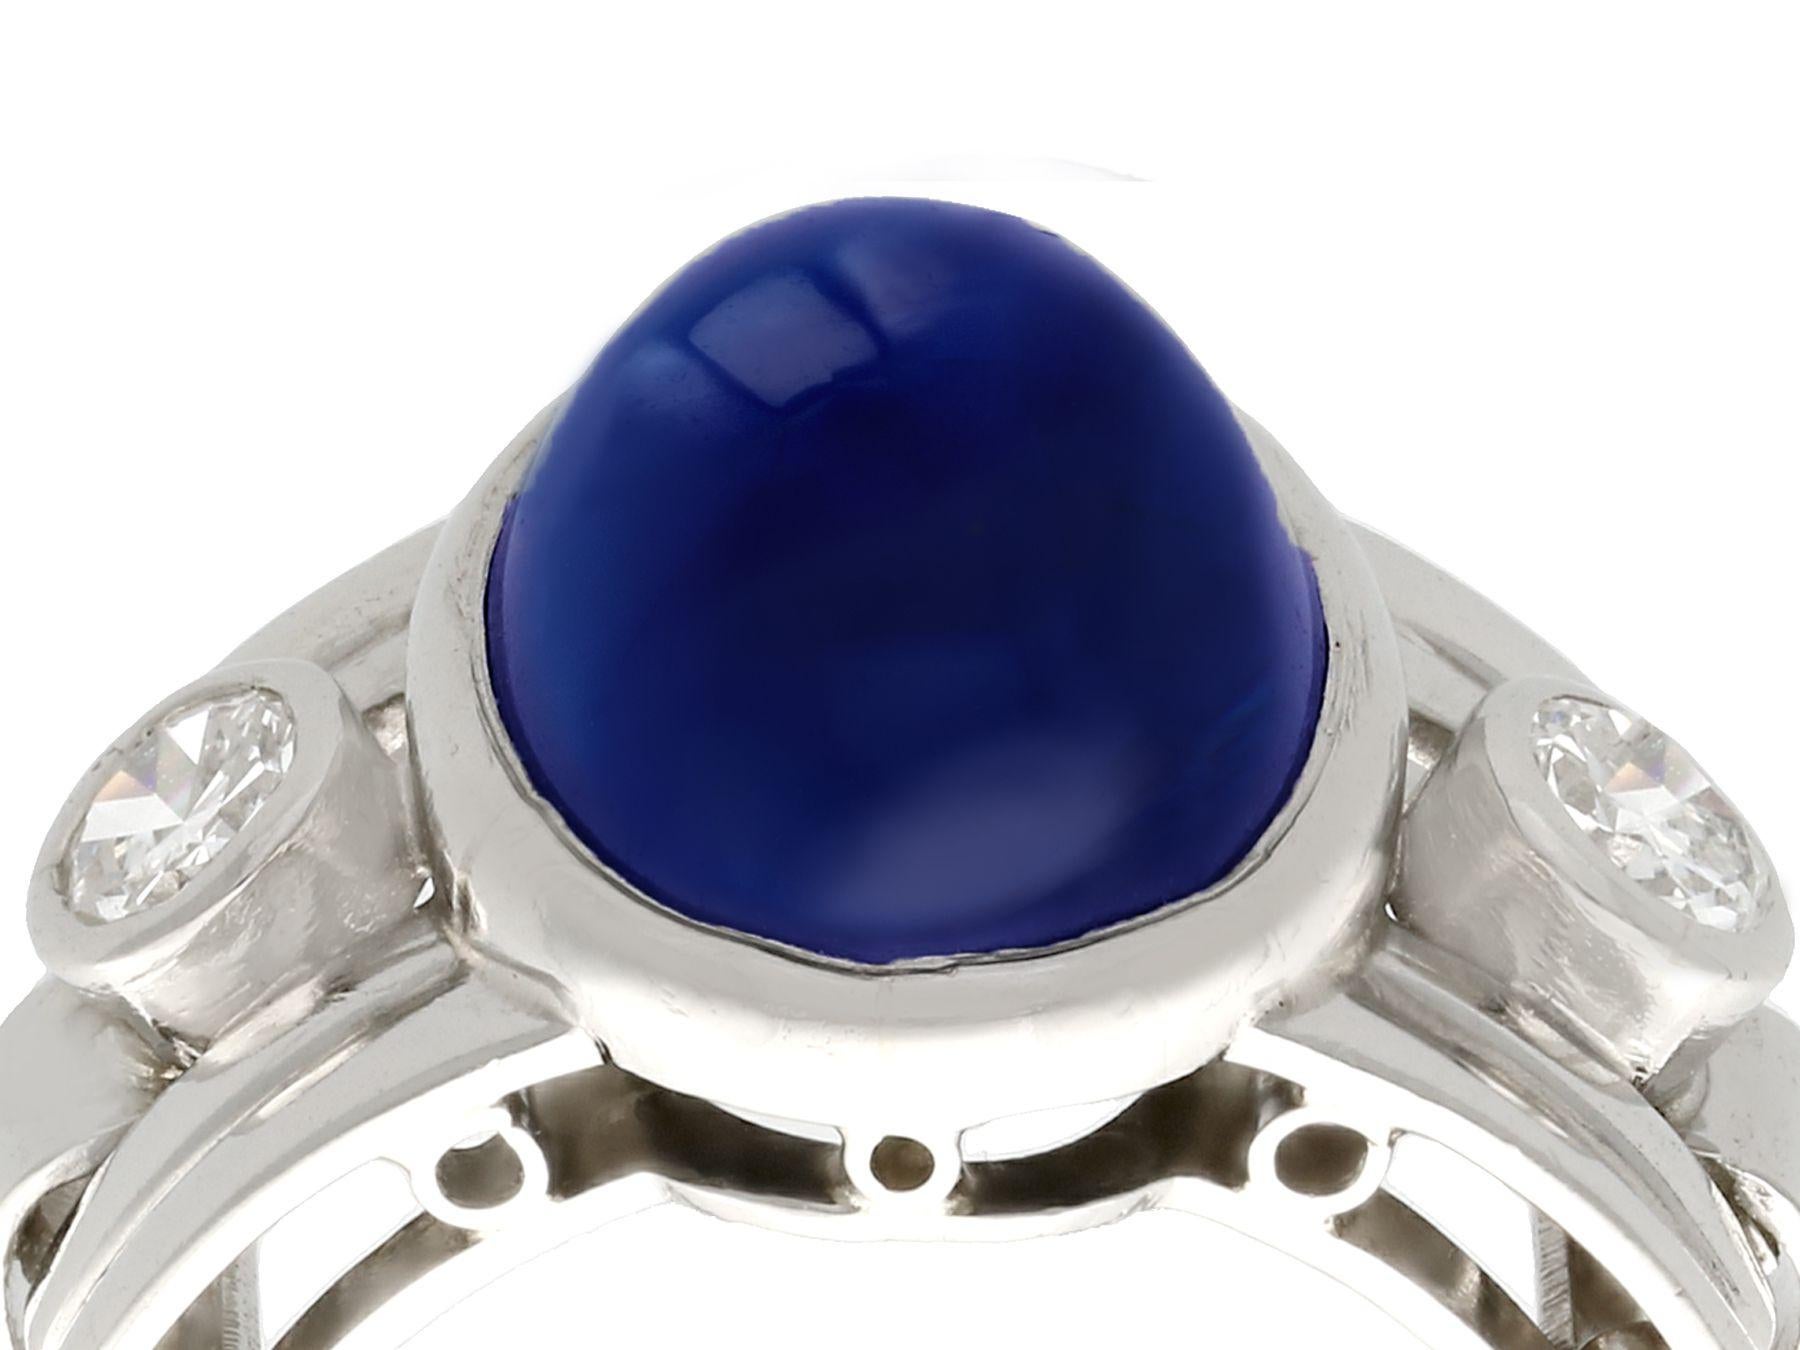 A stunning, fine and impressive vintage 7.62 carat blue sapphire, 0.60 carat diamond and platinum cocktail ring; part of our diverse vintage jewelry collections.

This stunning, fine and impressive 1950s cabochon cut sapphire cocktail ring has been